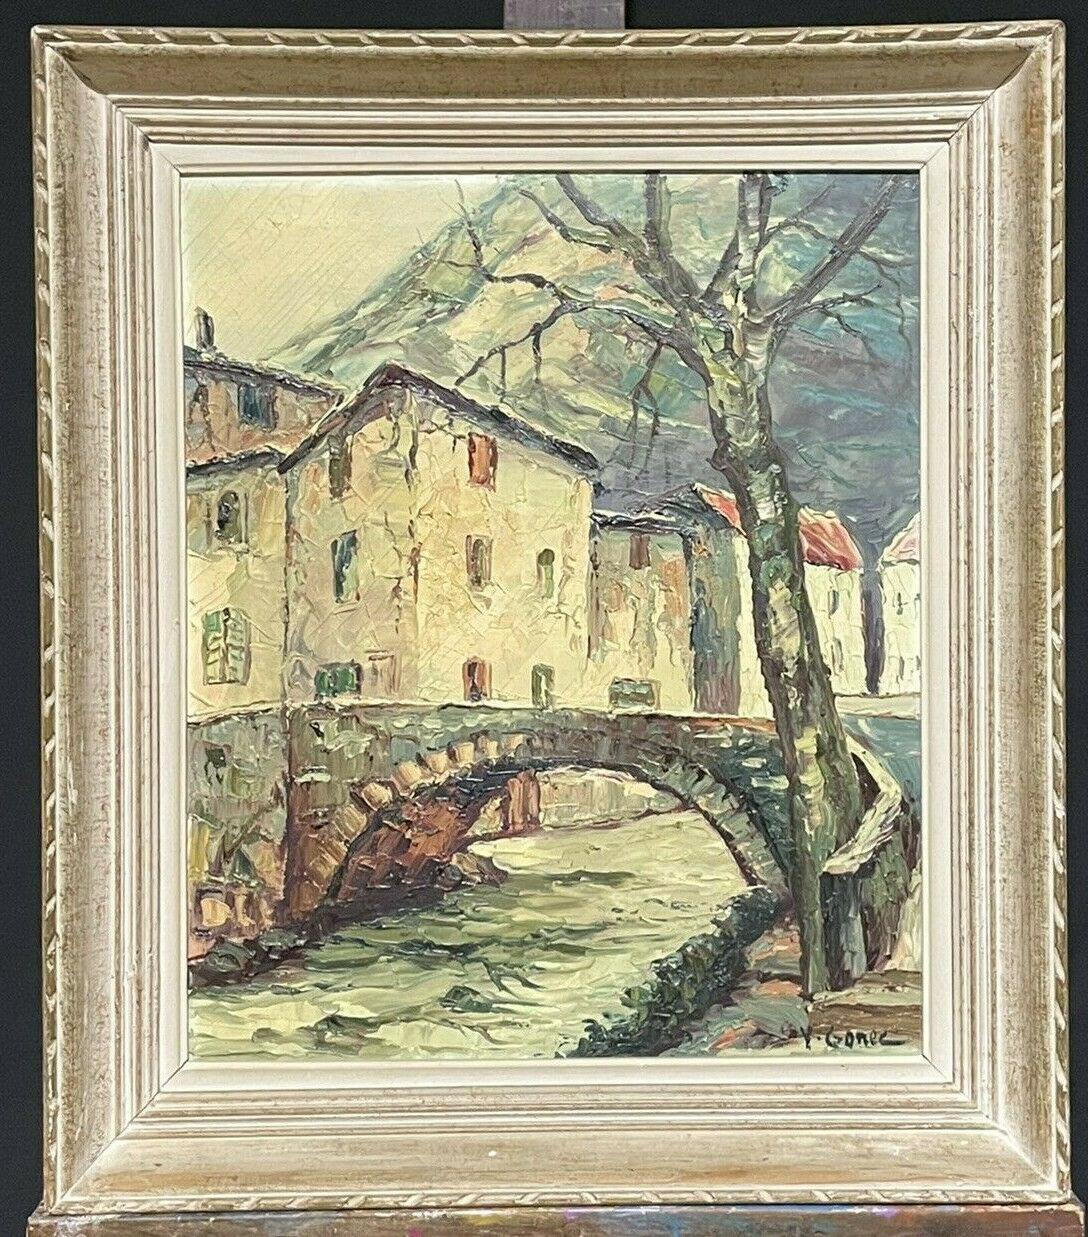 Unknown Landscape Painting - VINTAGE FRENCH MID CENTURY OIL PAINTING - OLD FRENCH TOWN BRIDGE & RIVER - FRAME